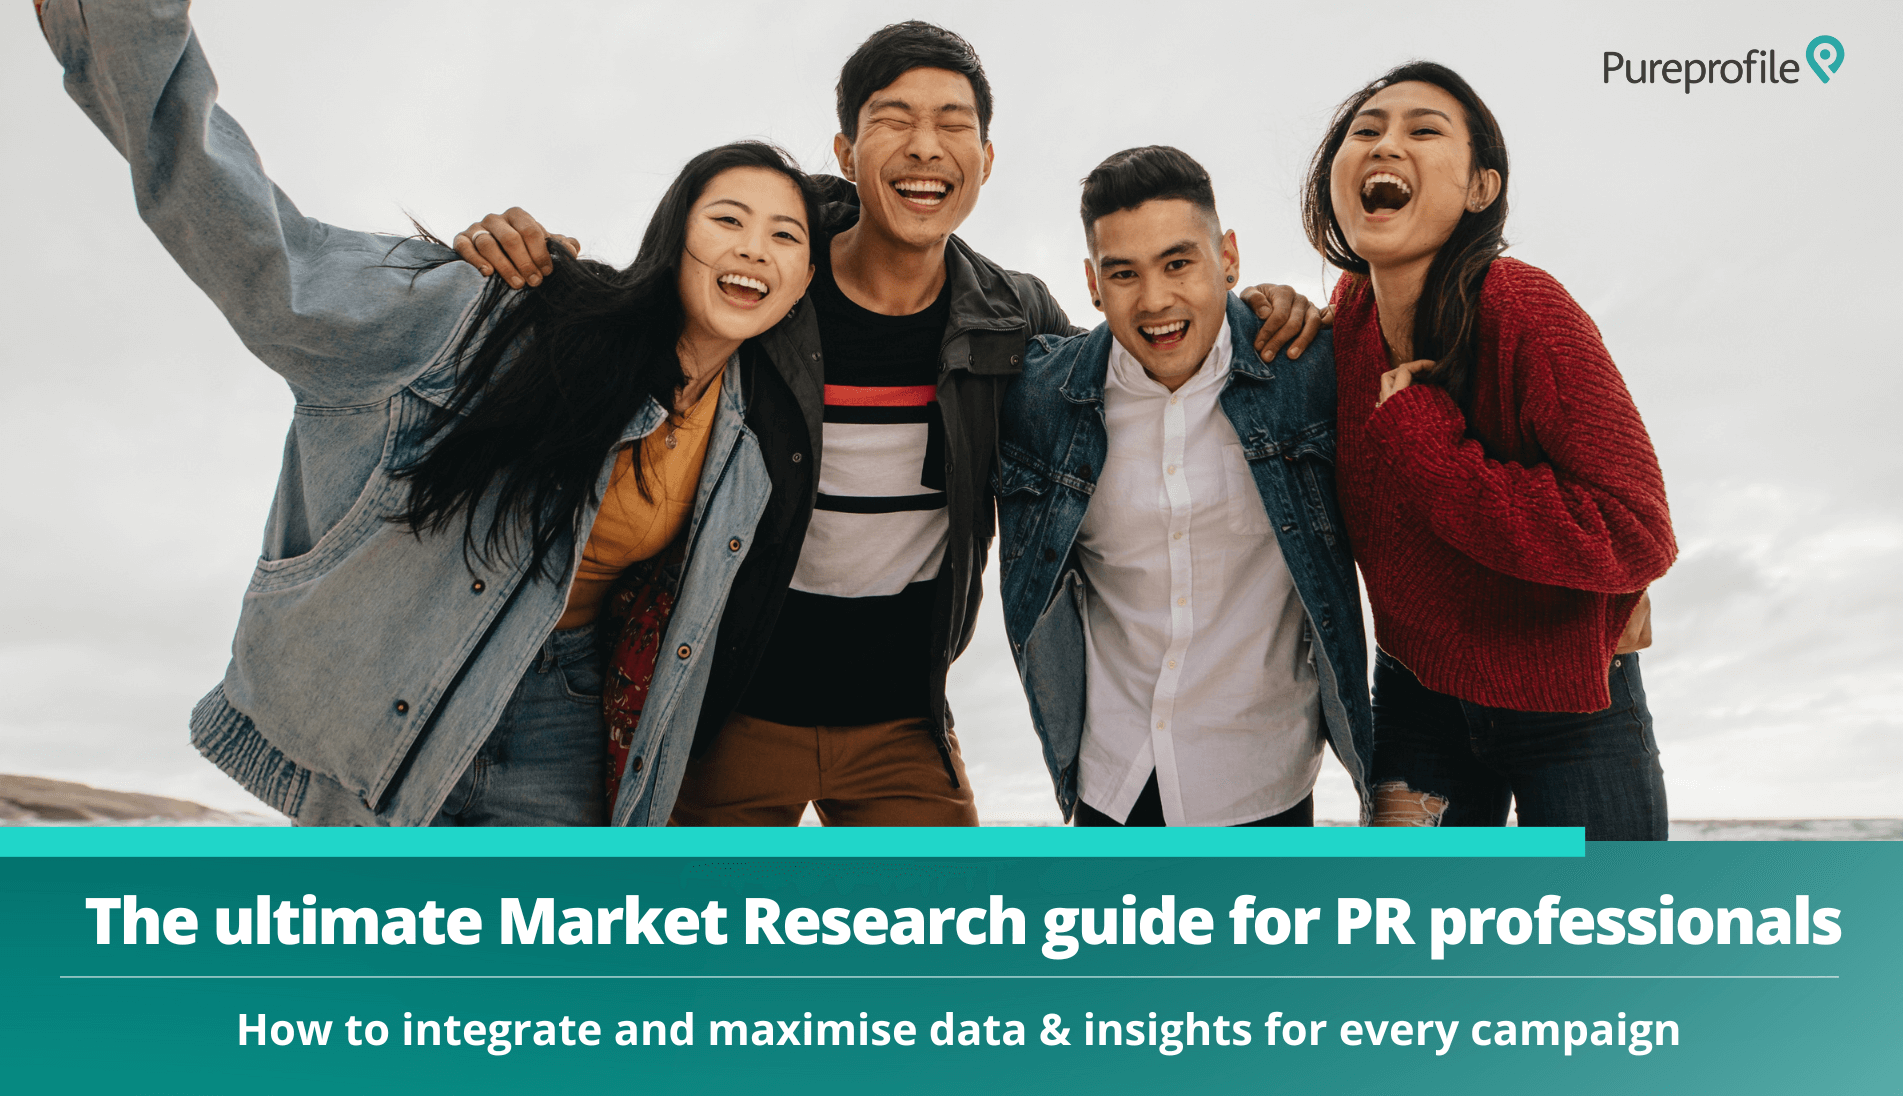 The ultimate Market Research guide for PR professionals